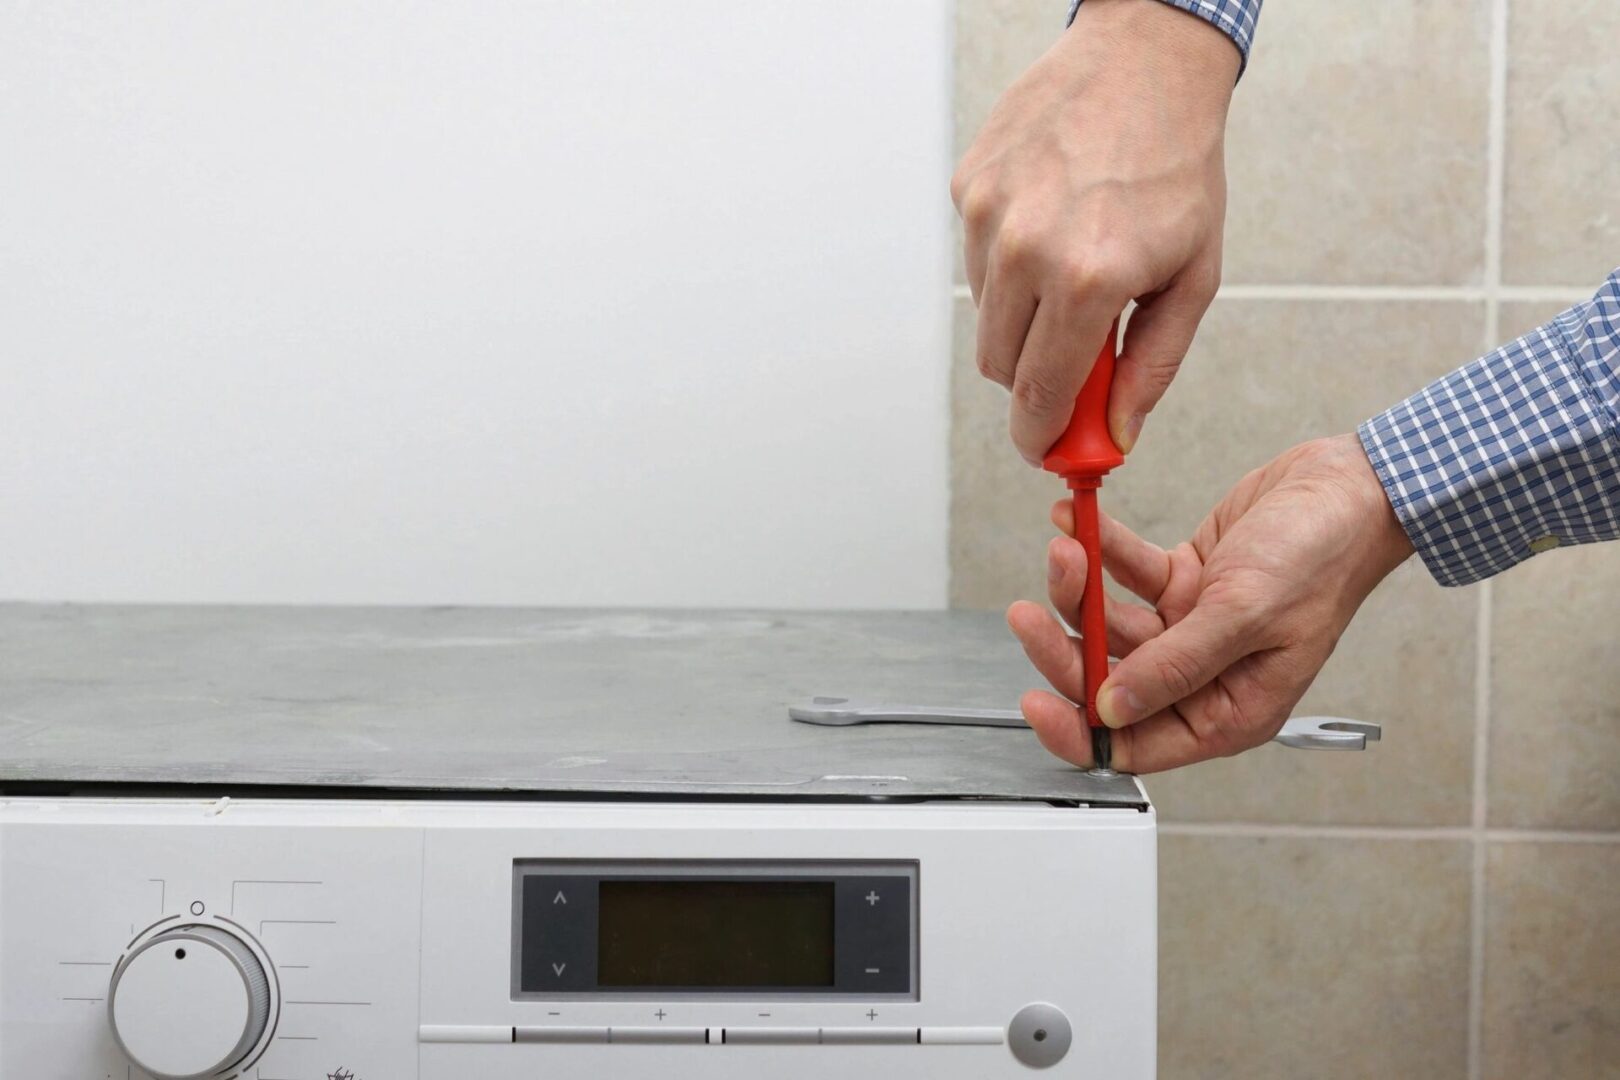 A person is cutting paper with scissors.